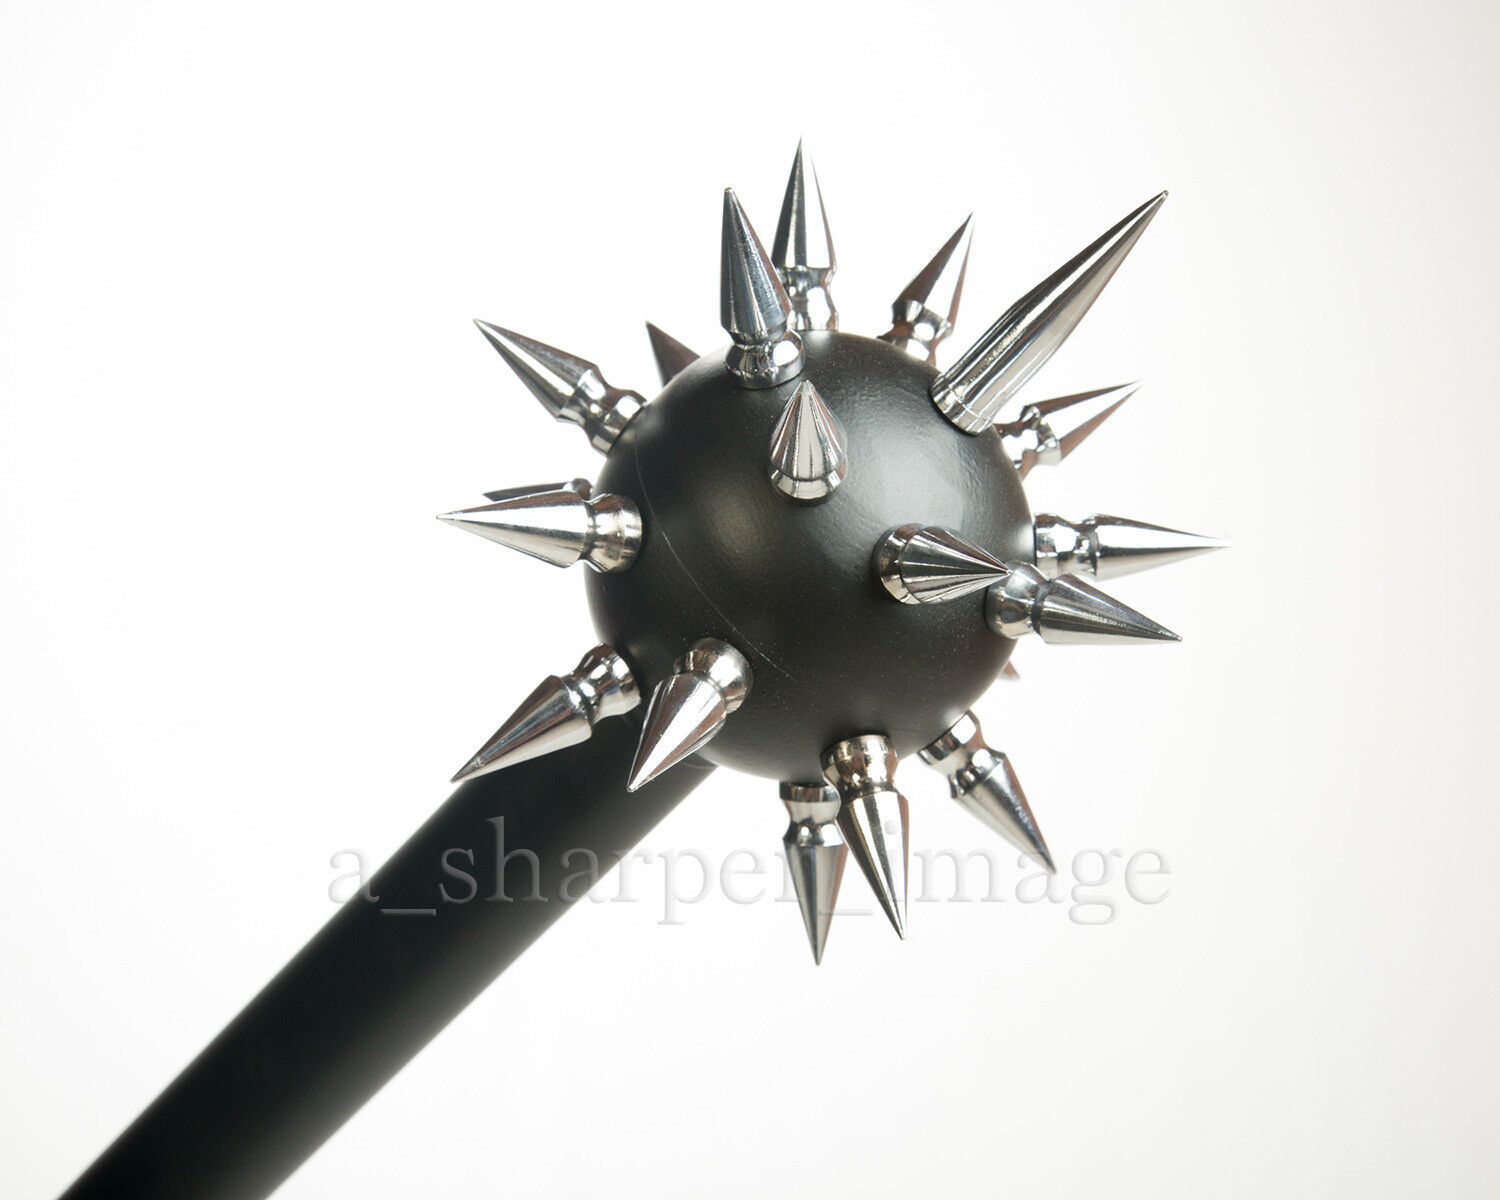 Medieval Spiked Ball Mace Black + Silver Spikes Morning Star Morgenstern 34.5